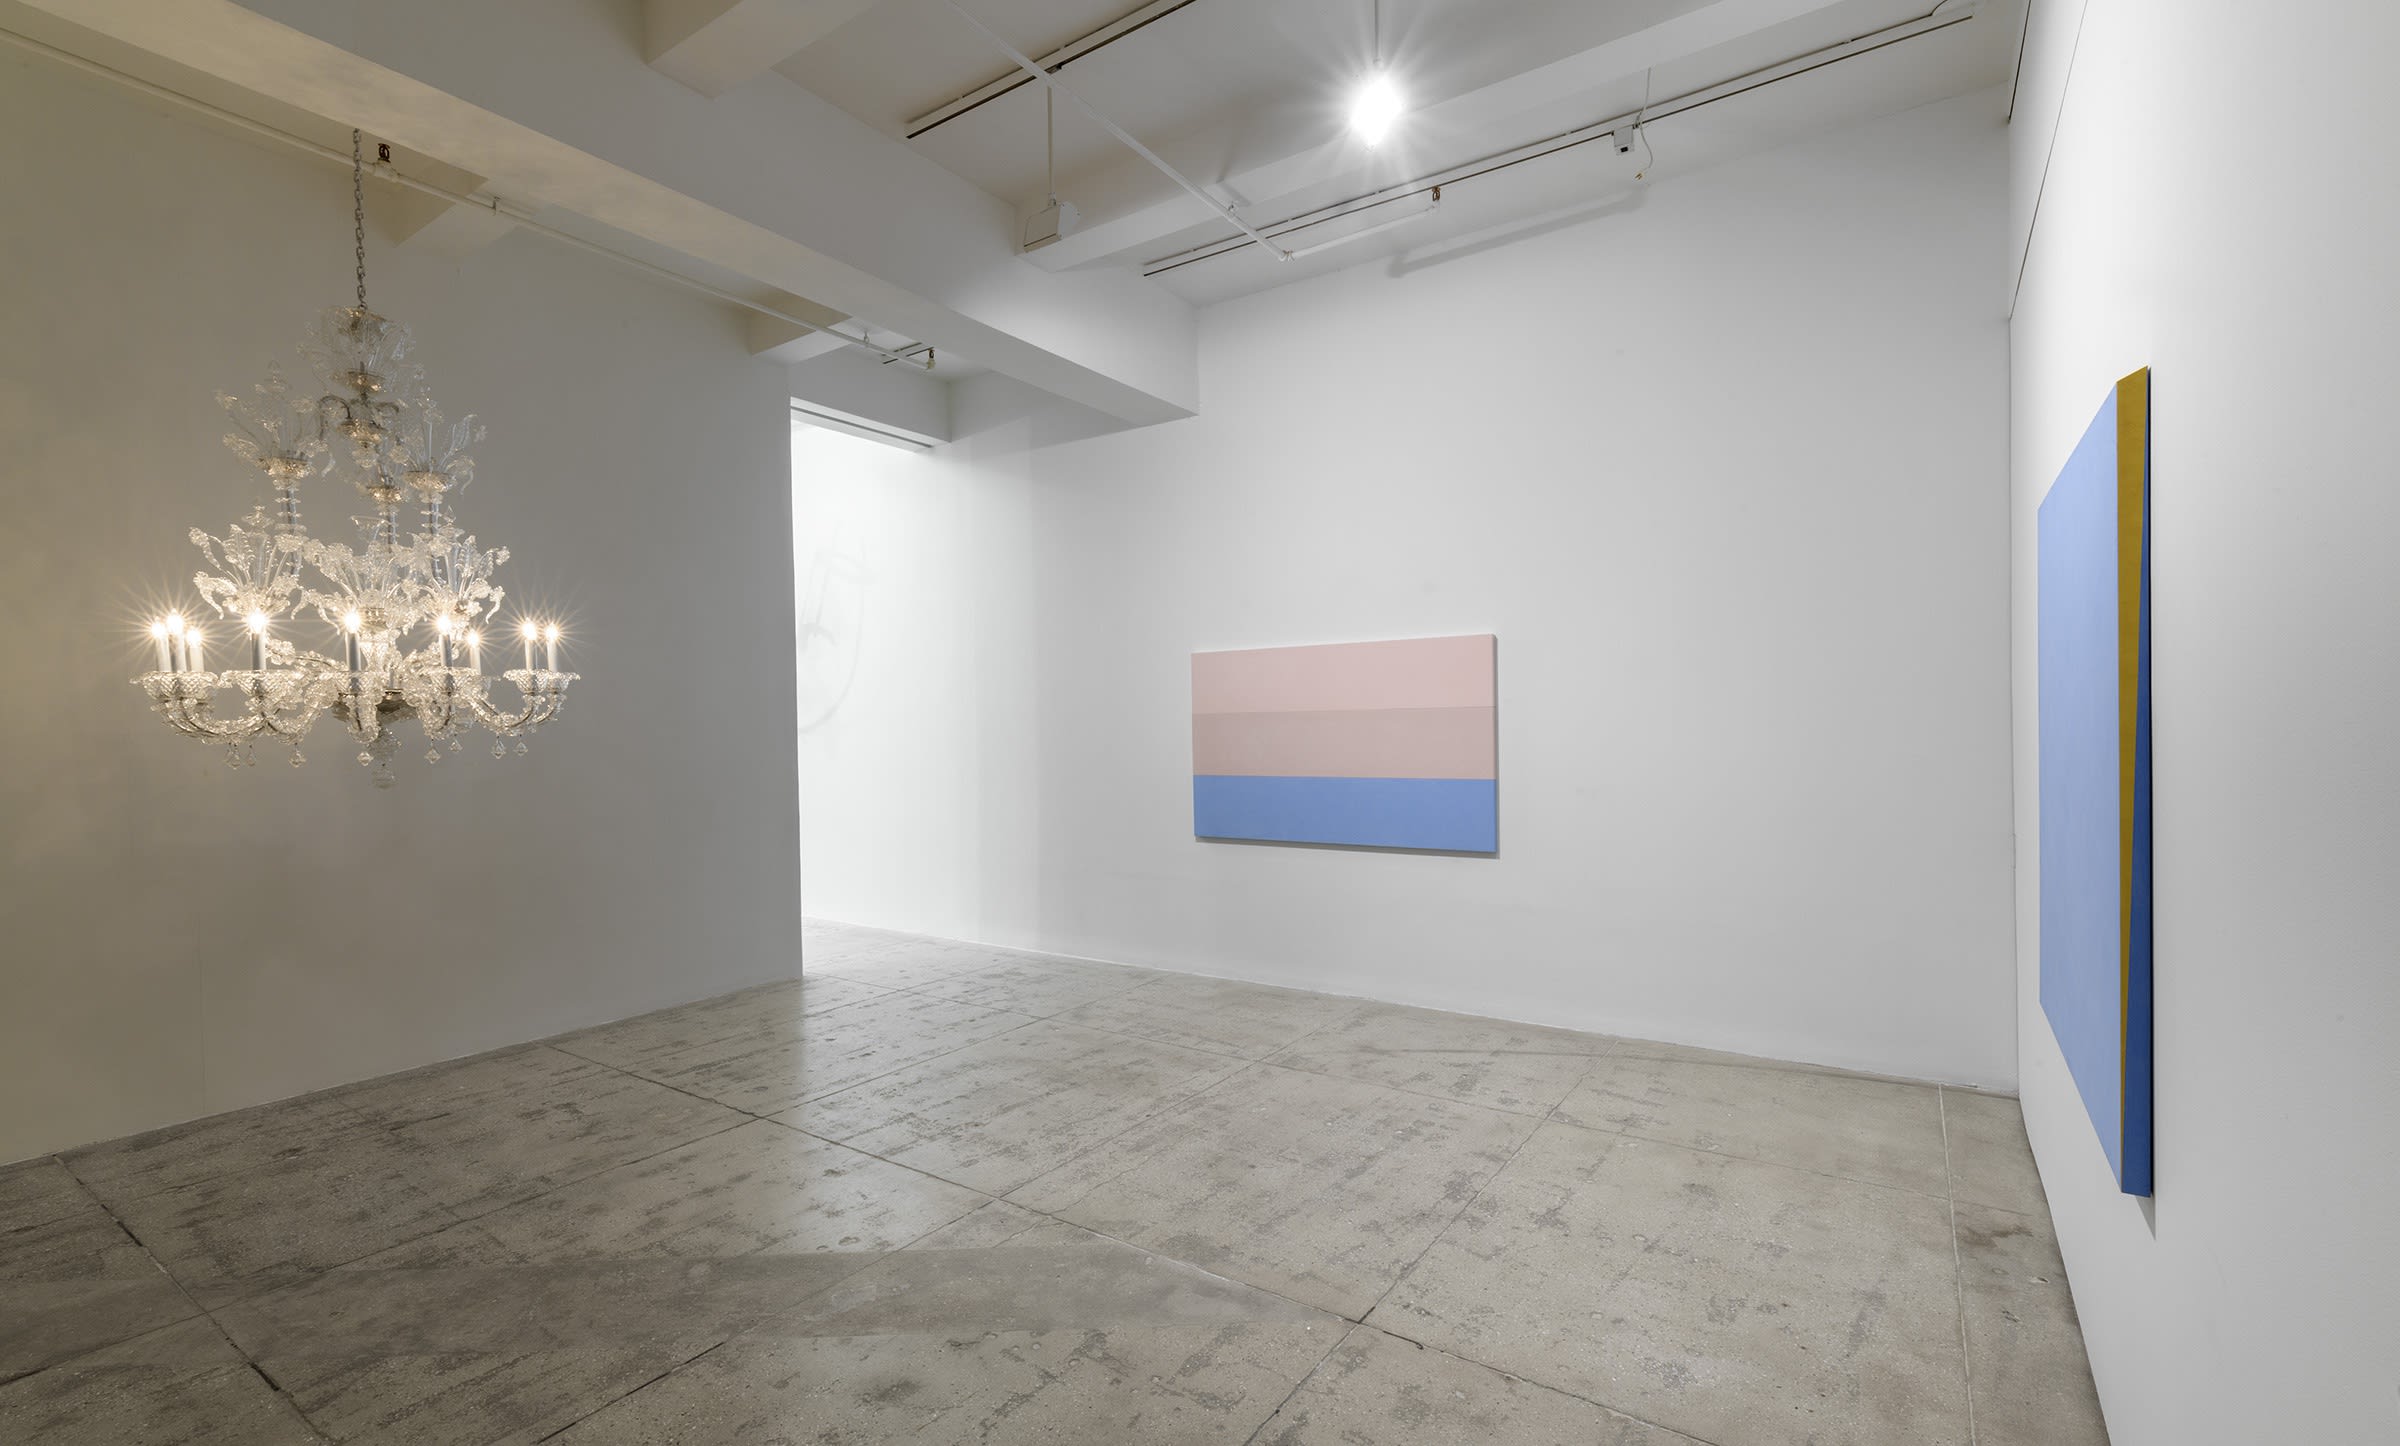 2 blue and pink paintings hang in the gallery; there is a chandelier hanging from the ceiling to the left.